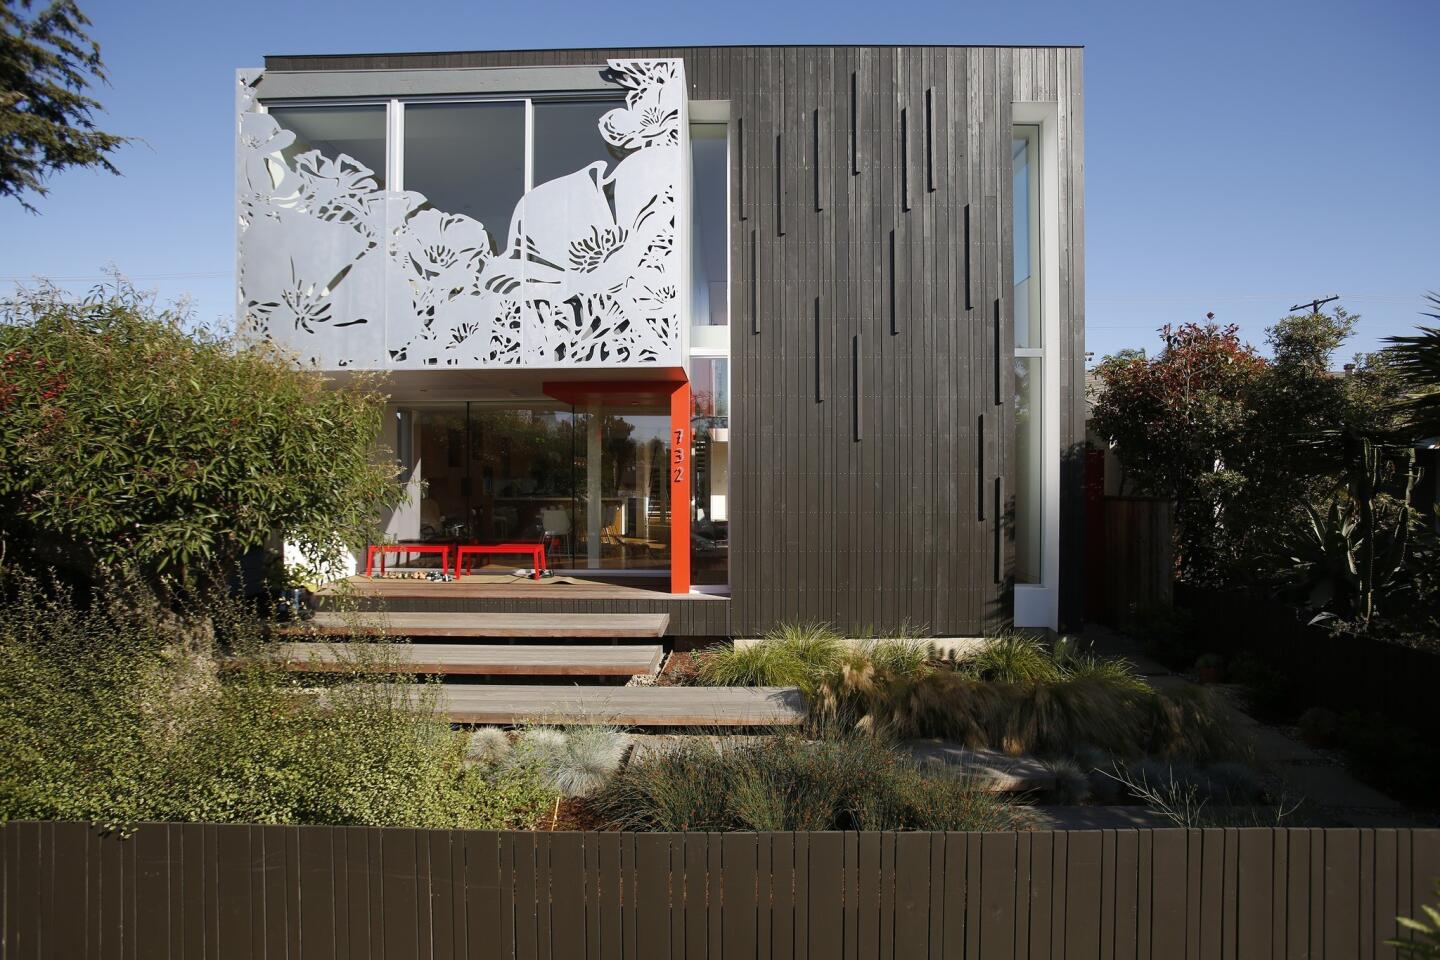 A floral silhouette cut into the second-floor aluminum screen creates a facade that wins second looks from passersby in Venice. Red accents on the ground floor of the house, designed by architect-owners Jonathan Ward and Jin Ah Park, reappear elsewhere, including on another aluminum panel visible from the interior courtyard.